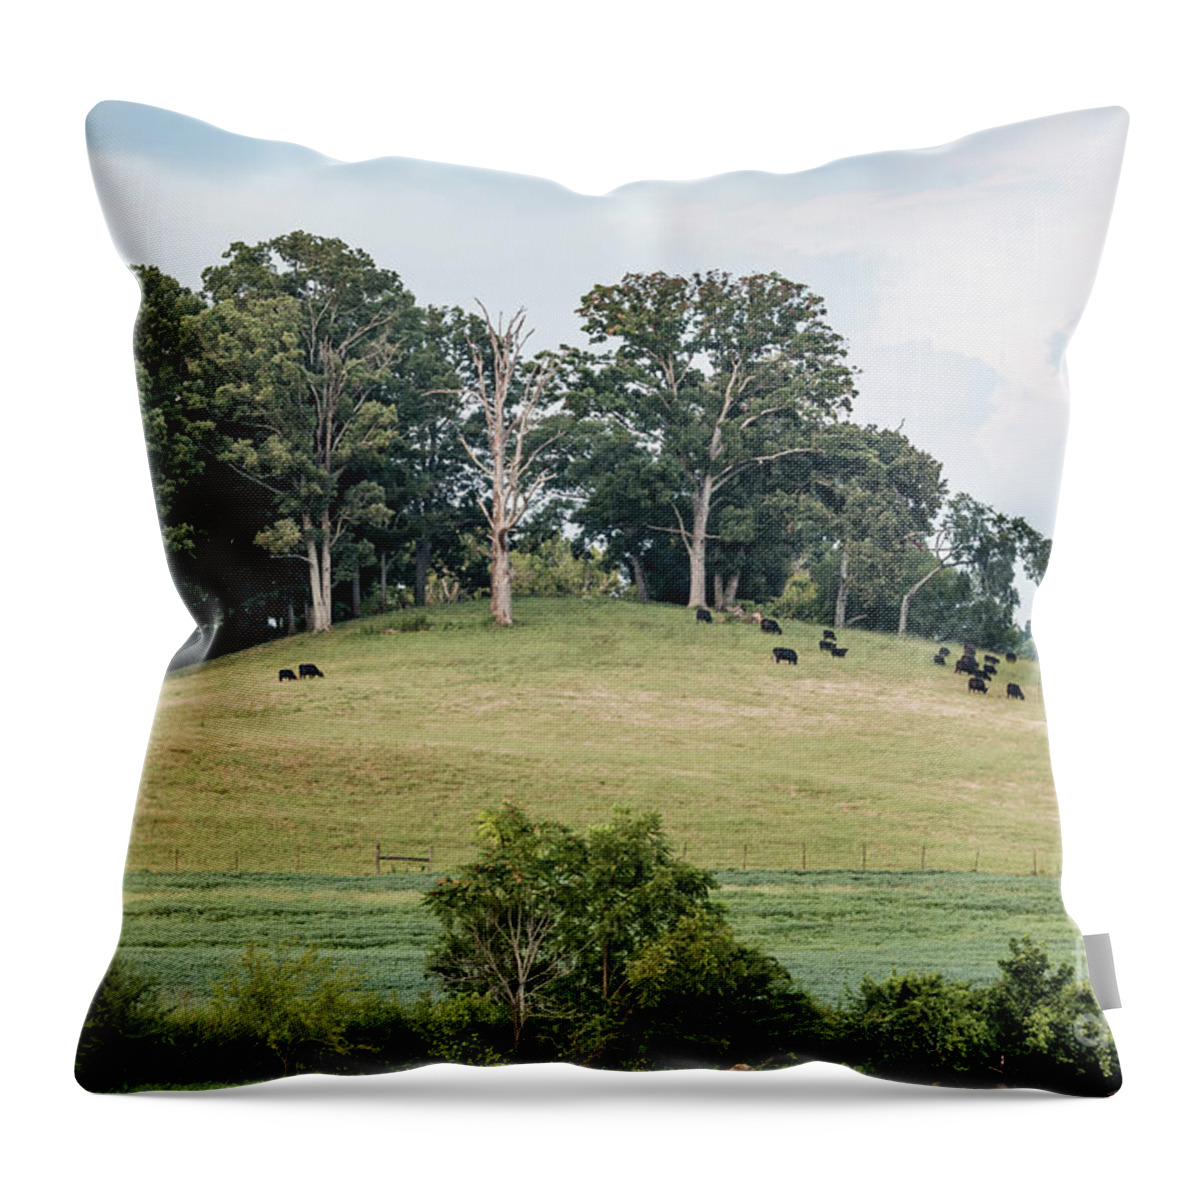 Ijams Nature Center Throw Pillow featuring the photograph Cows On A Hill by Todd Blanchard